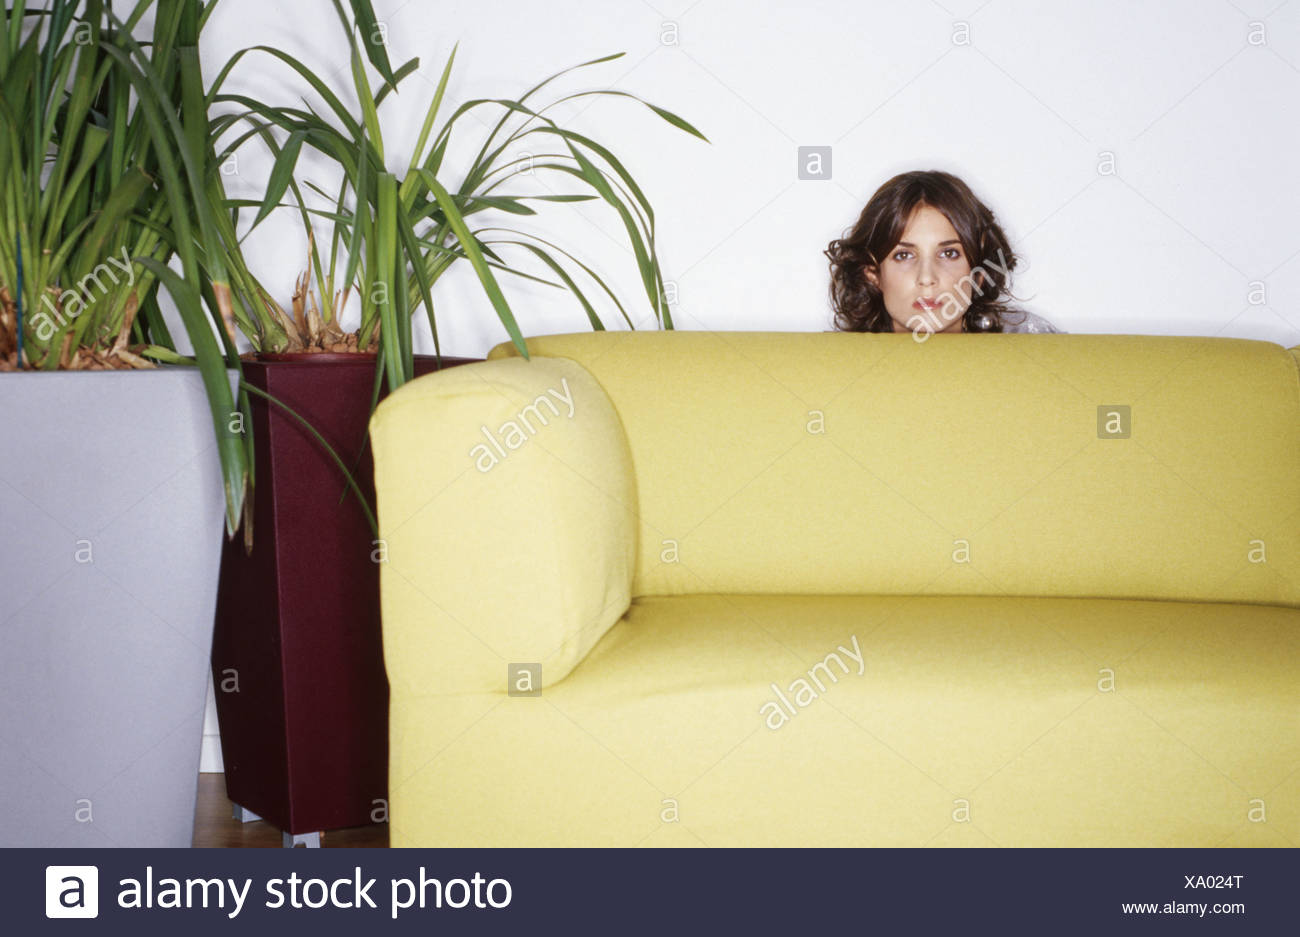 Woman Hiding Behind Couch Stock Photo 281514152 Alamy